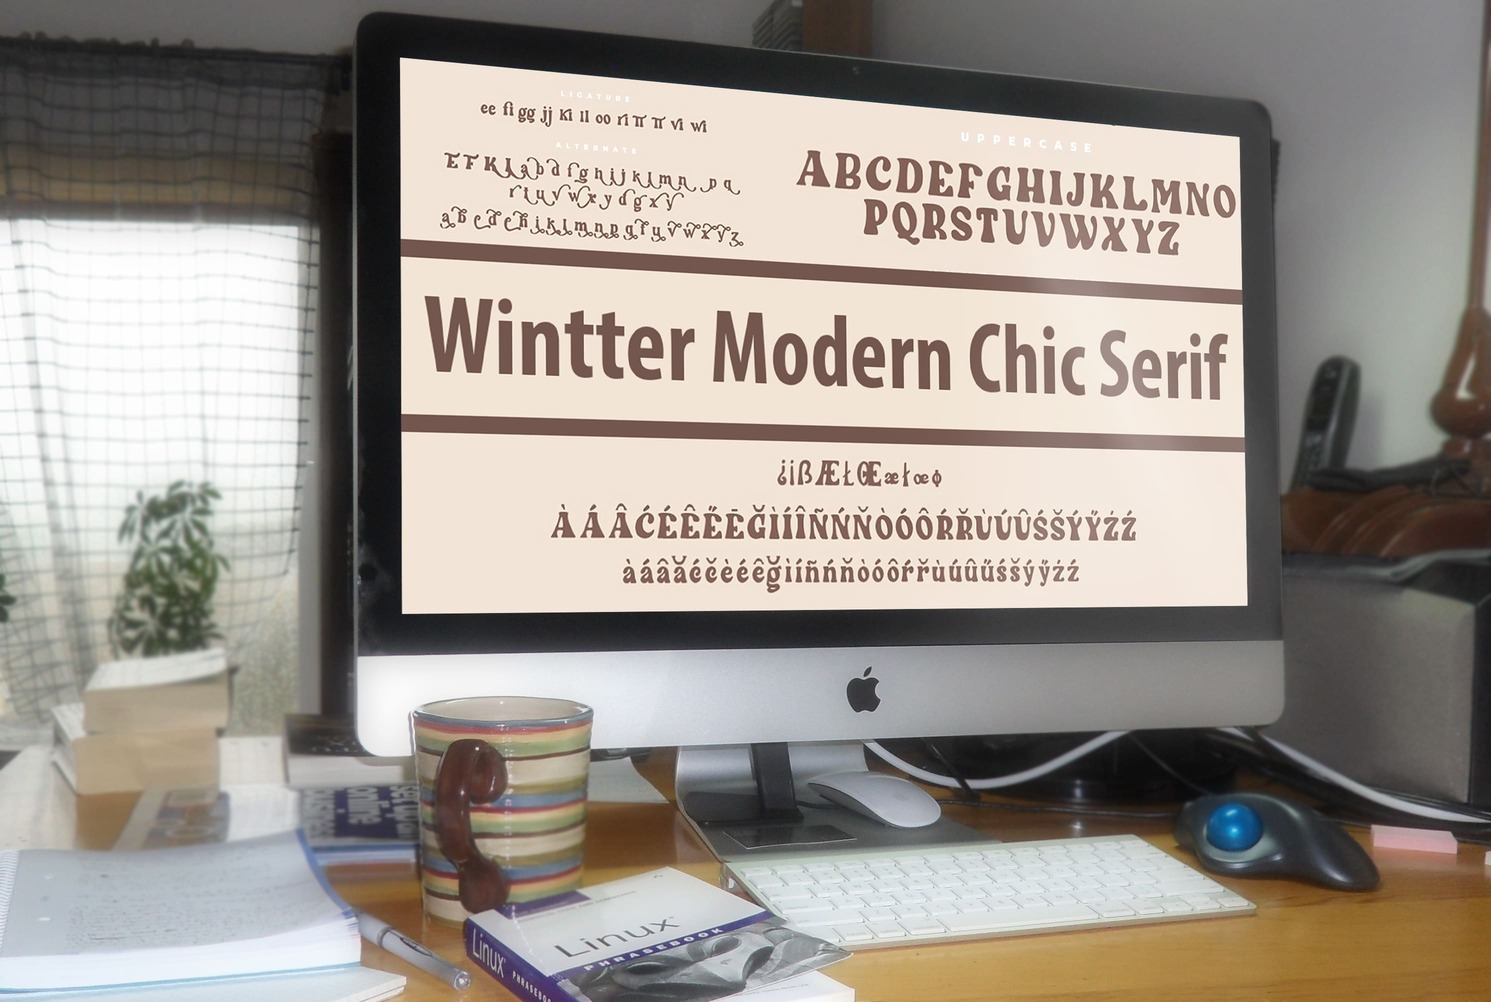 Wintter Modern Chic Serif Symbols Preview On The Monoblock.